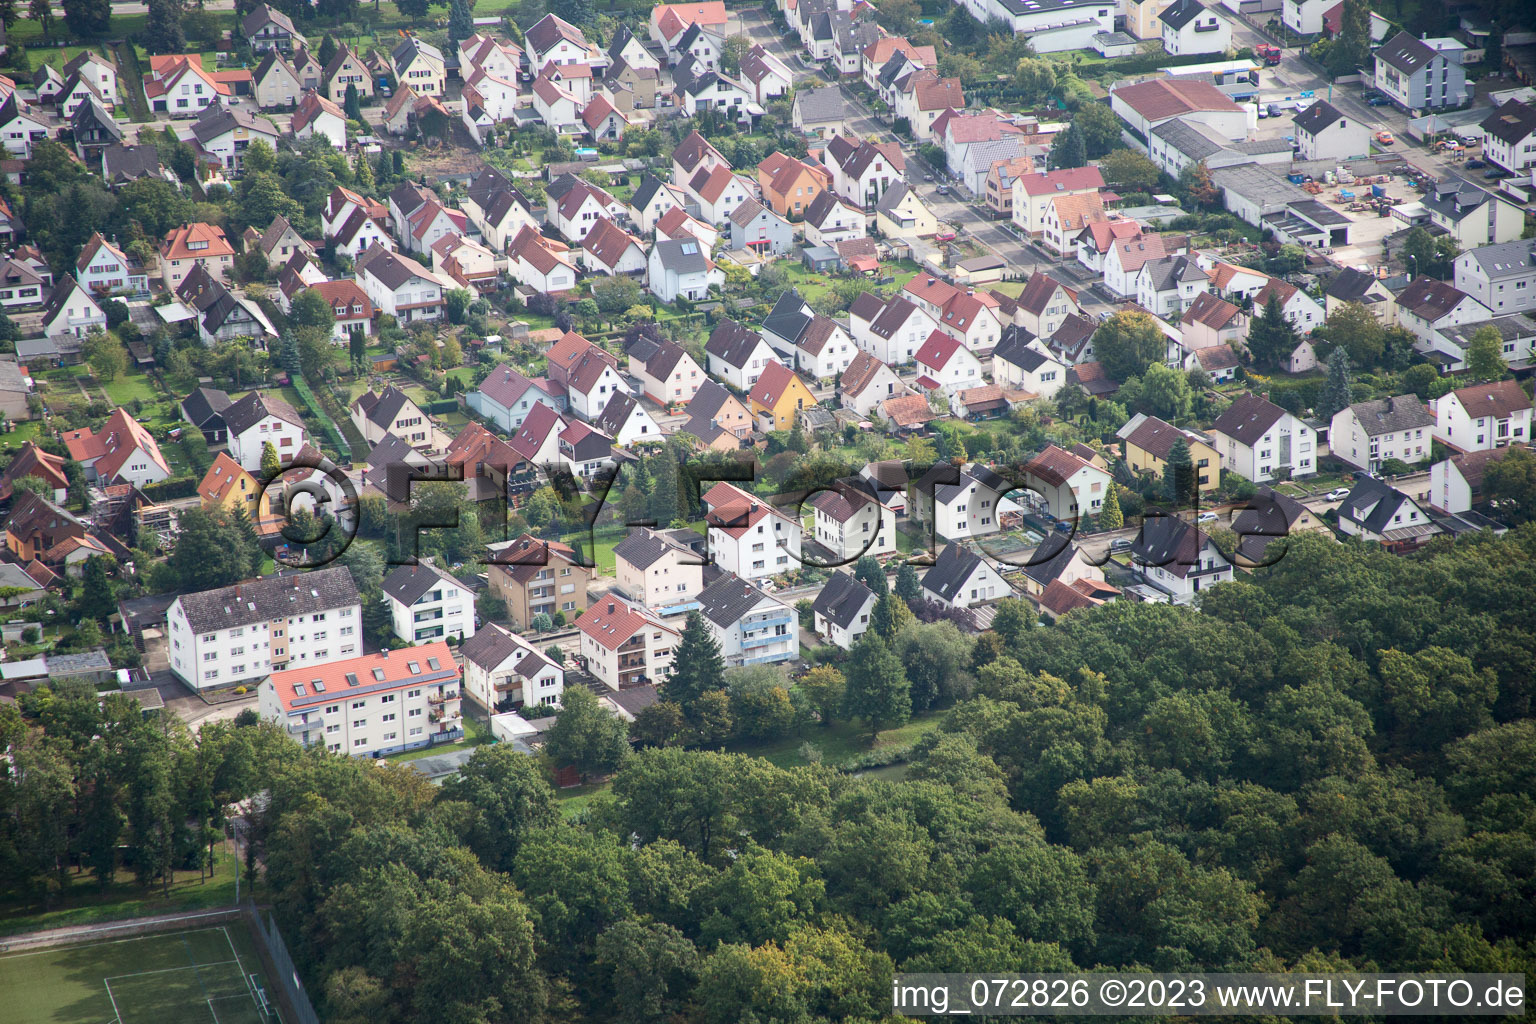 Settlement in Kandel in the state Rhineland-Palatinate, Germany